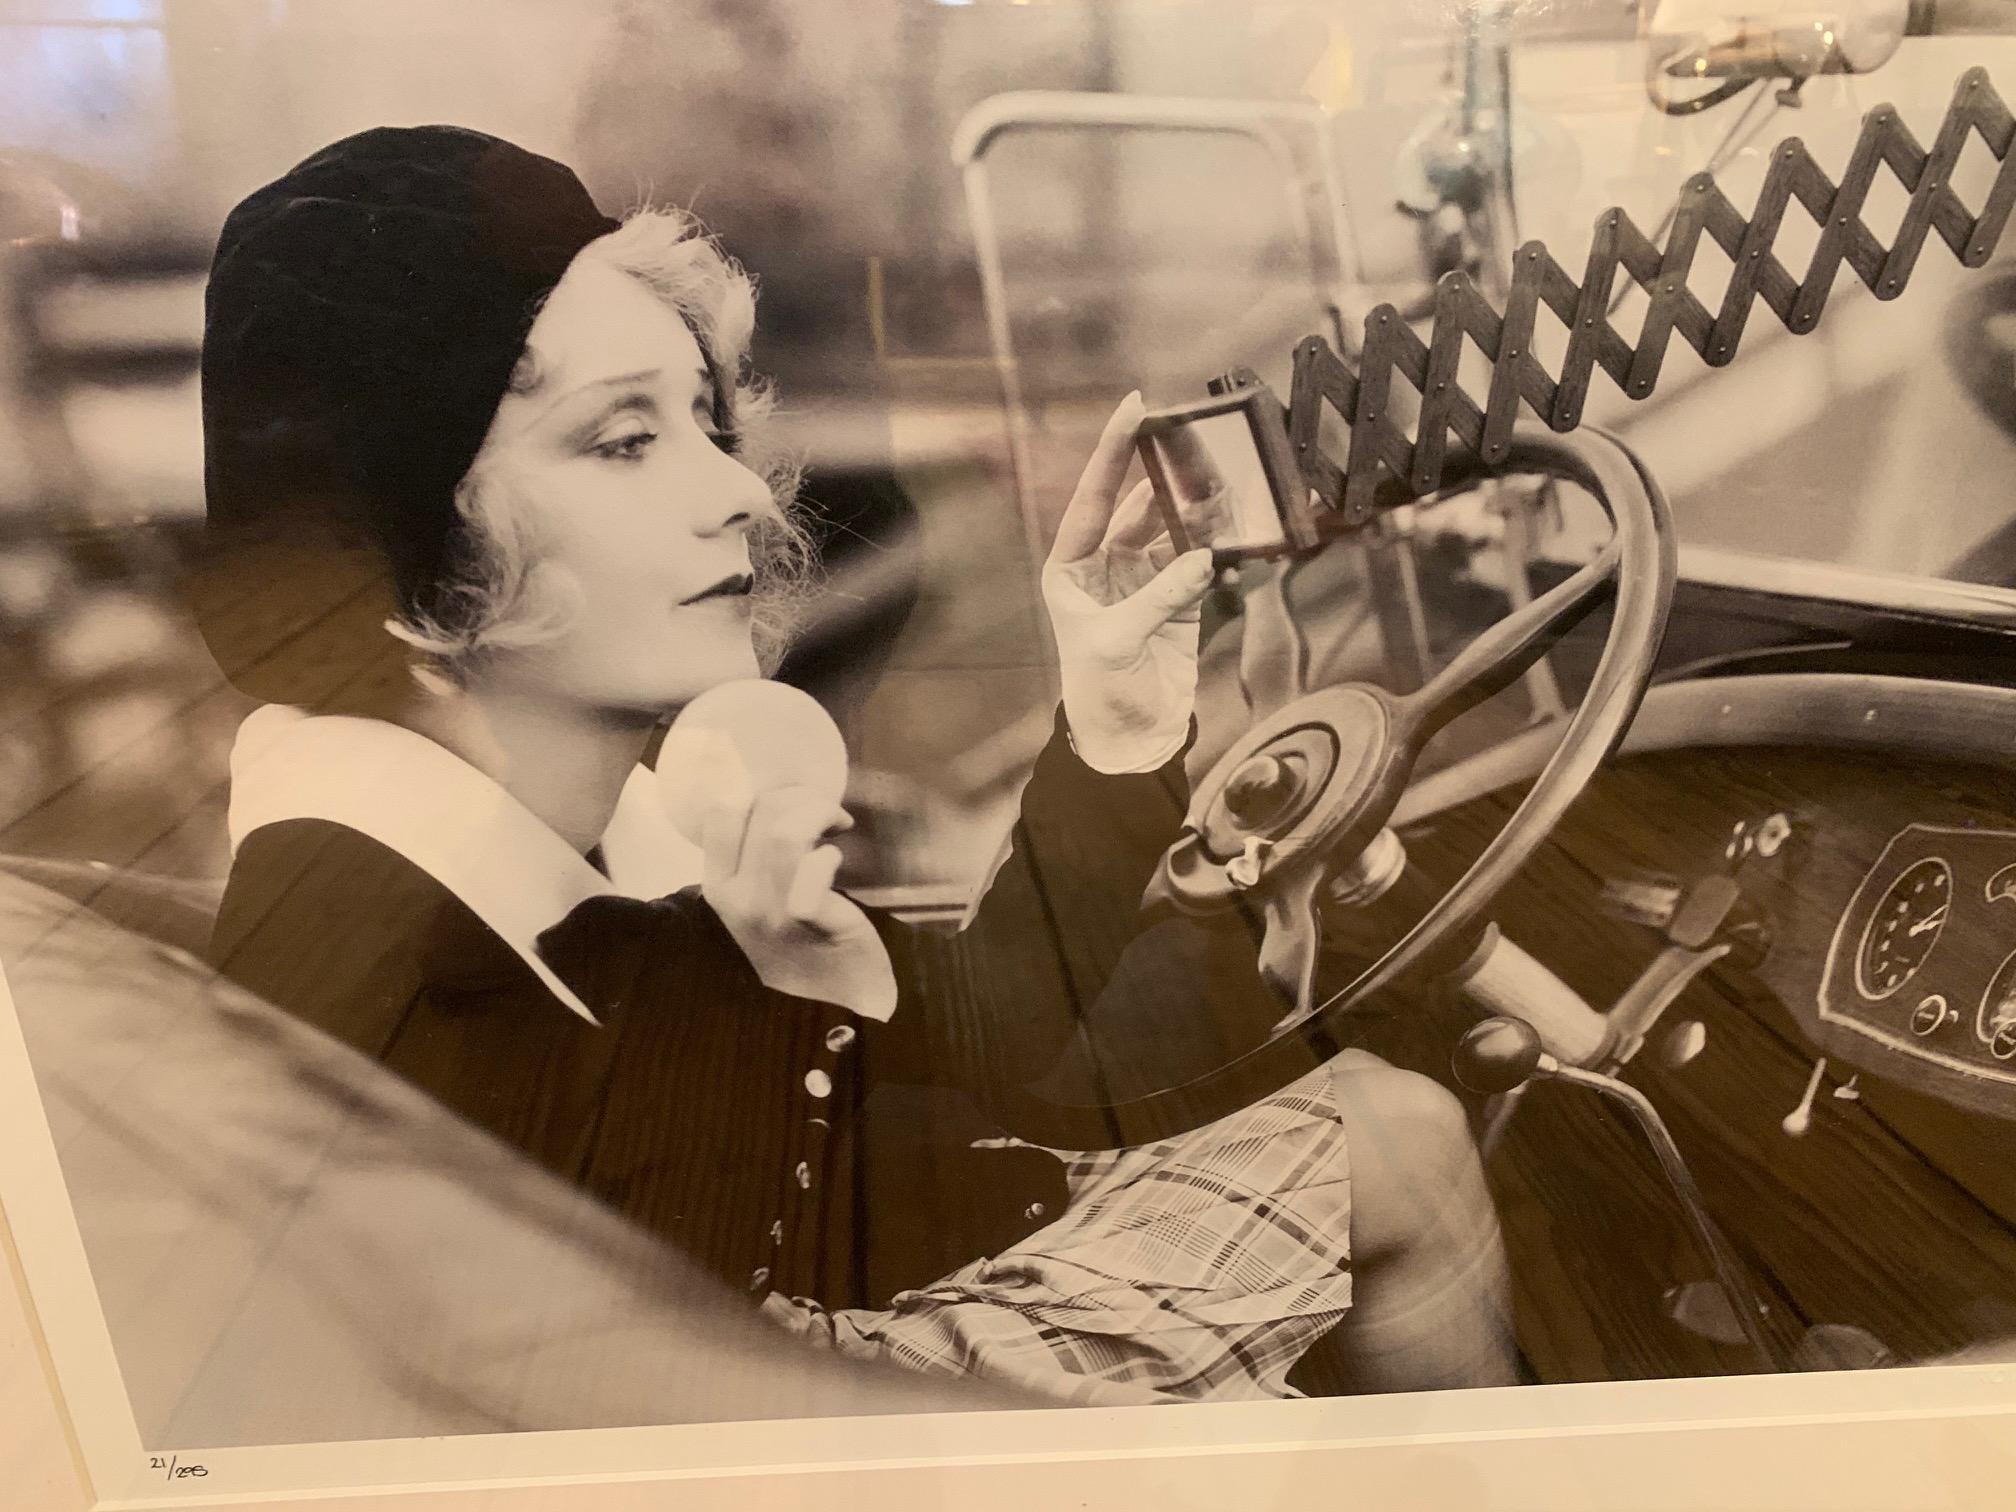 Big beautiful black and white photograph of glamorous Hollywood moviestar Anita Page putting make up on in a glitzy convertible. Limited edition.

Note: Other glam moviestar photos are available that make a great grouping.